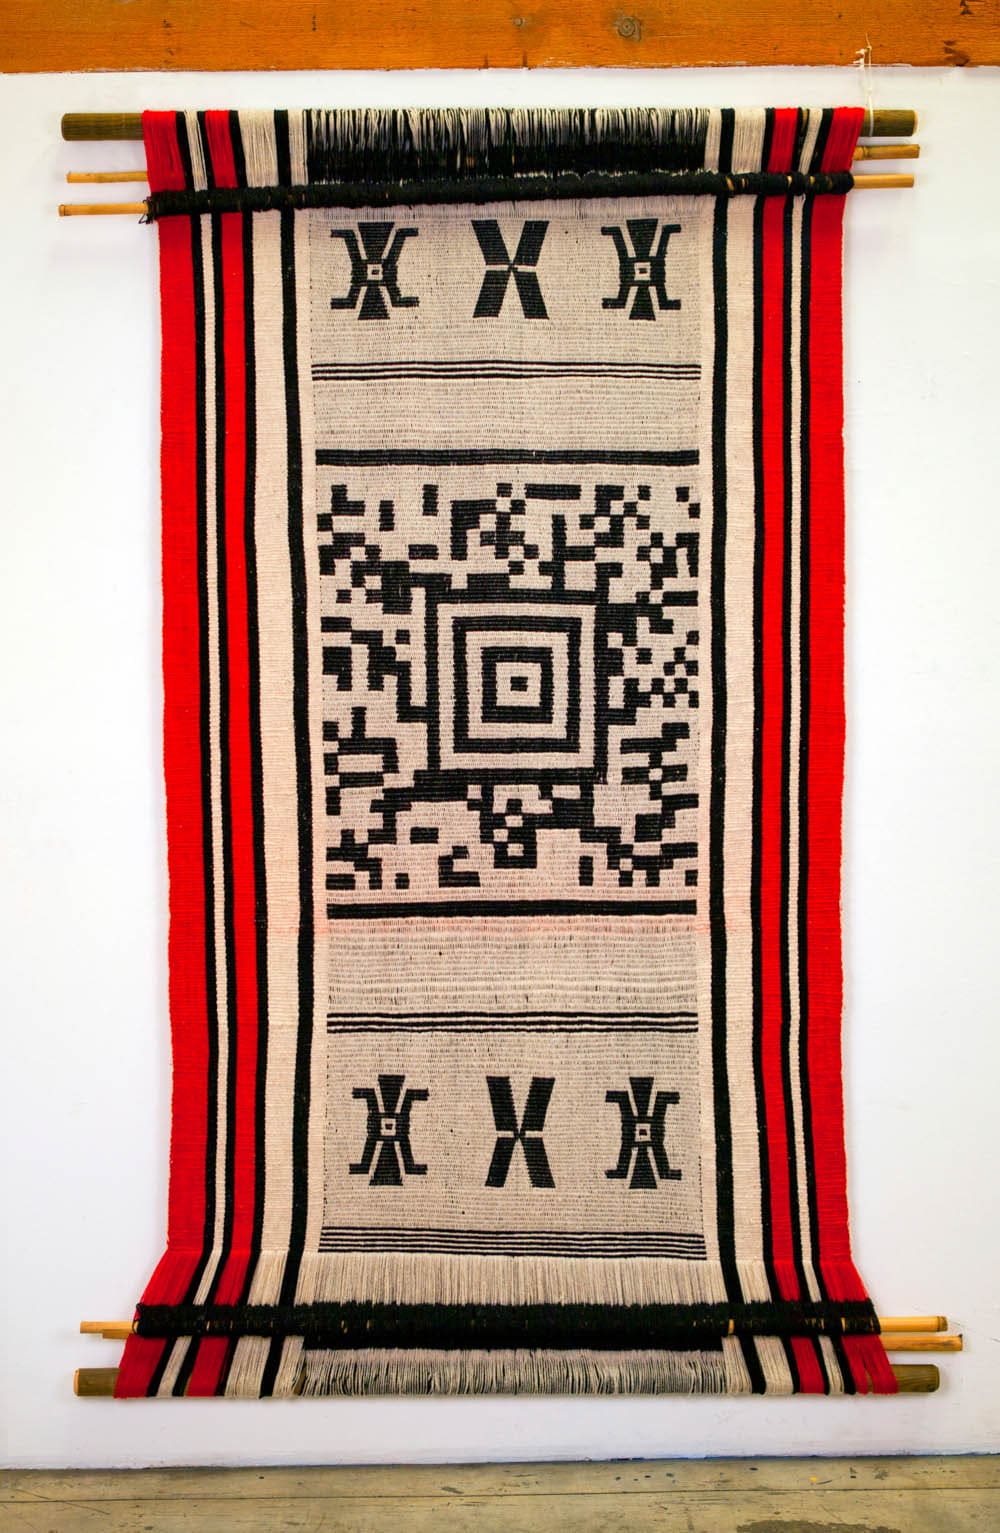 Redemption, 2012, Guillermo Bert (woven by Anita Paillamil), Wool, natural dyes, Courtesy of a private collection